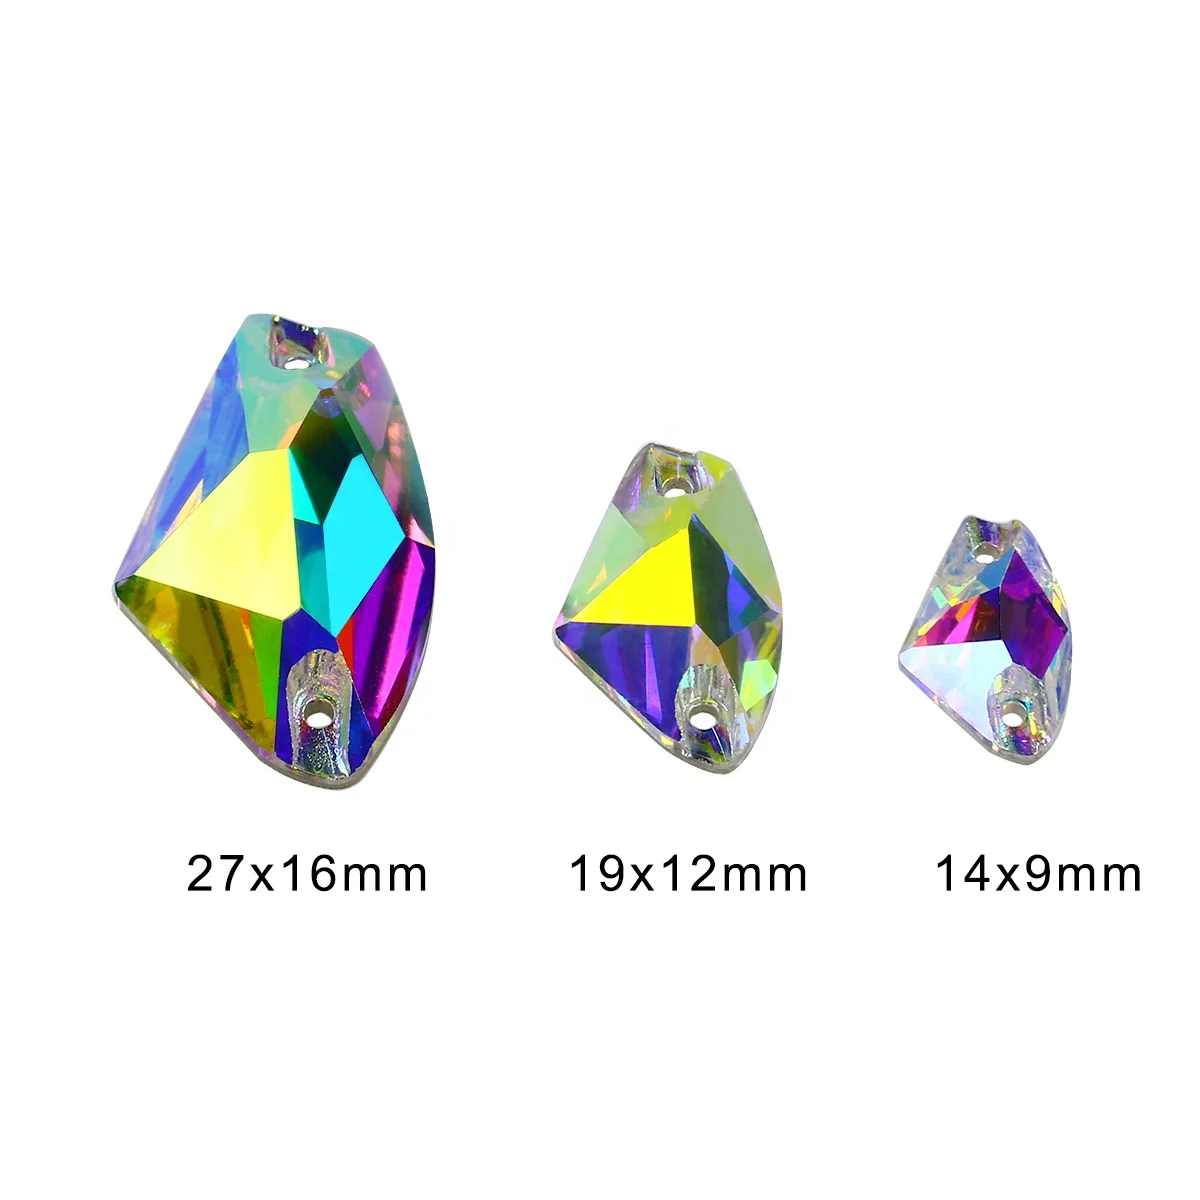 
DZ-3062 Galactic shape ab color crystal sew on rhinestones for clothes 